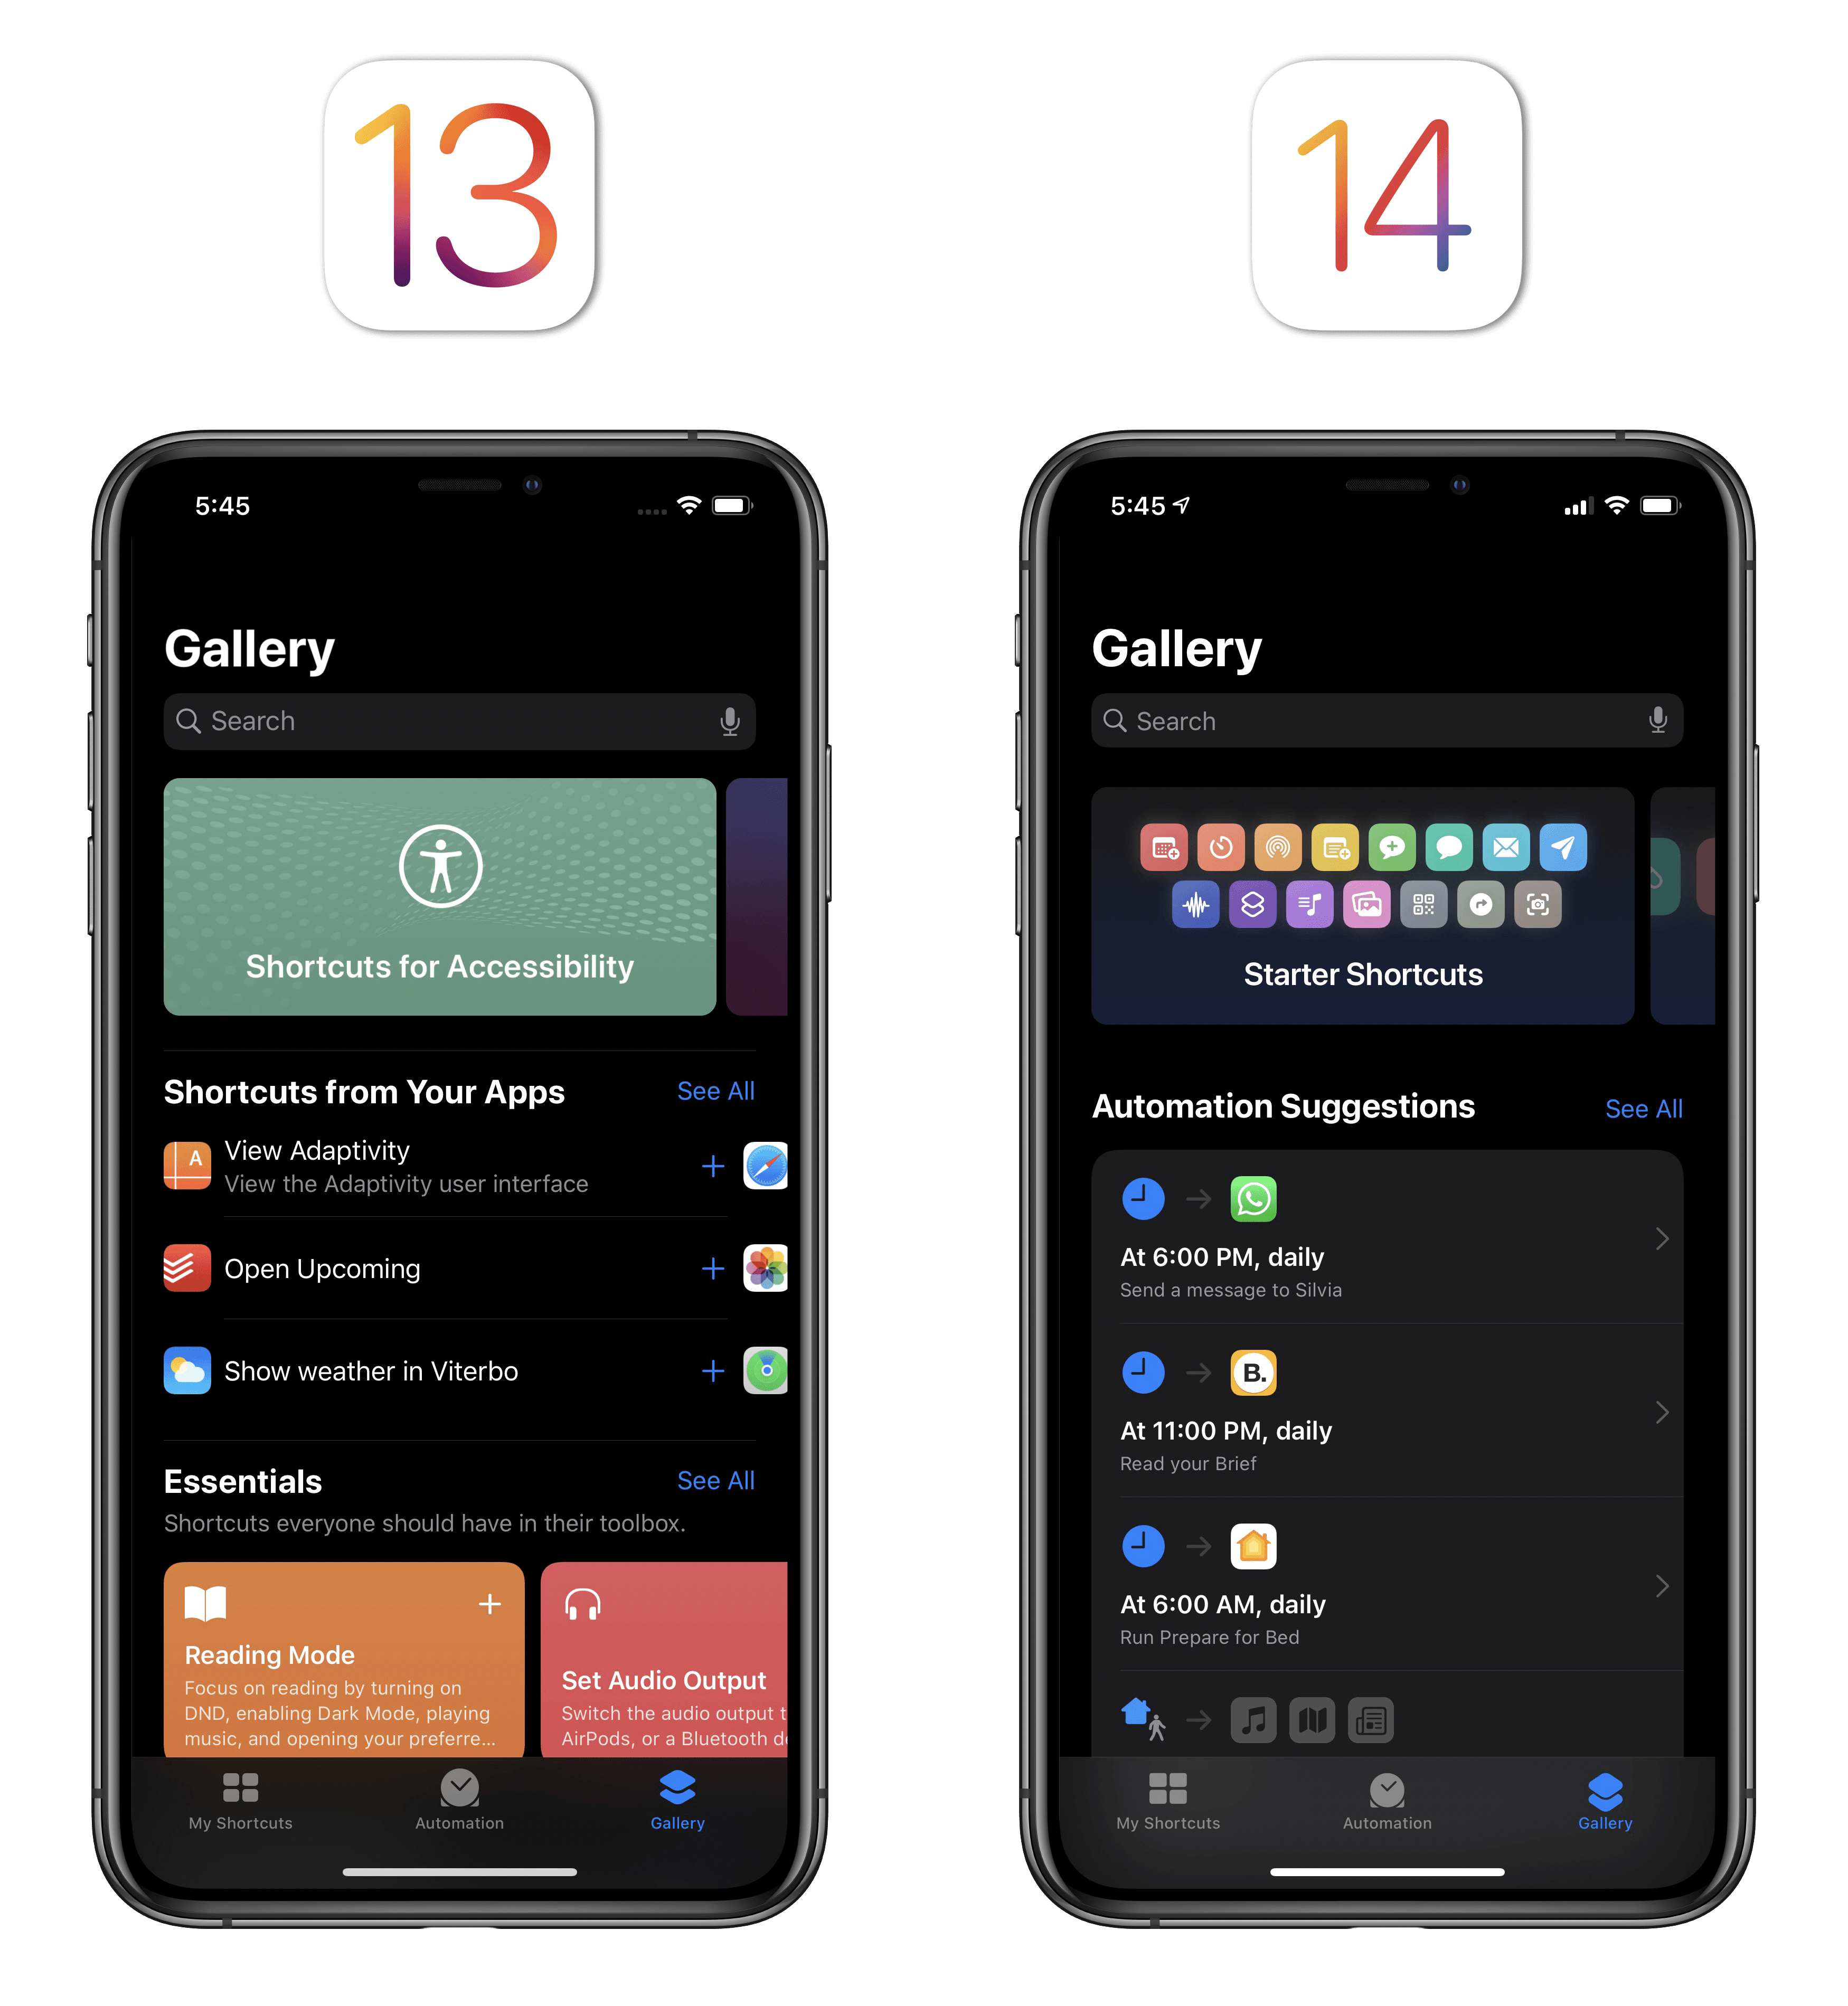 New suggested automations in the Shortcuts Gallery for iOS 14.